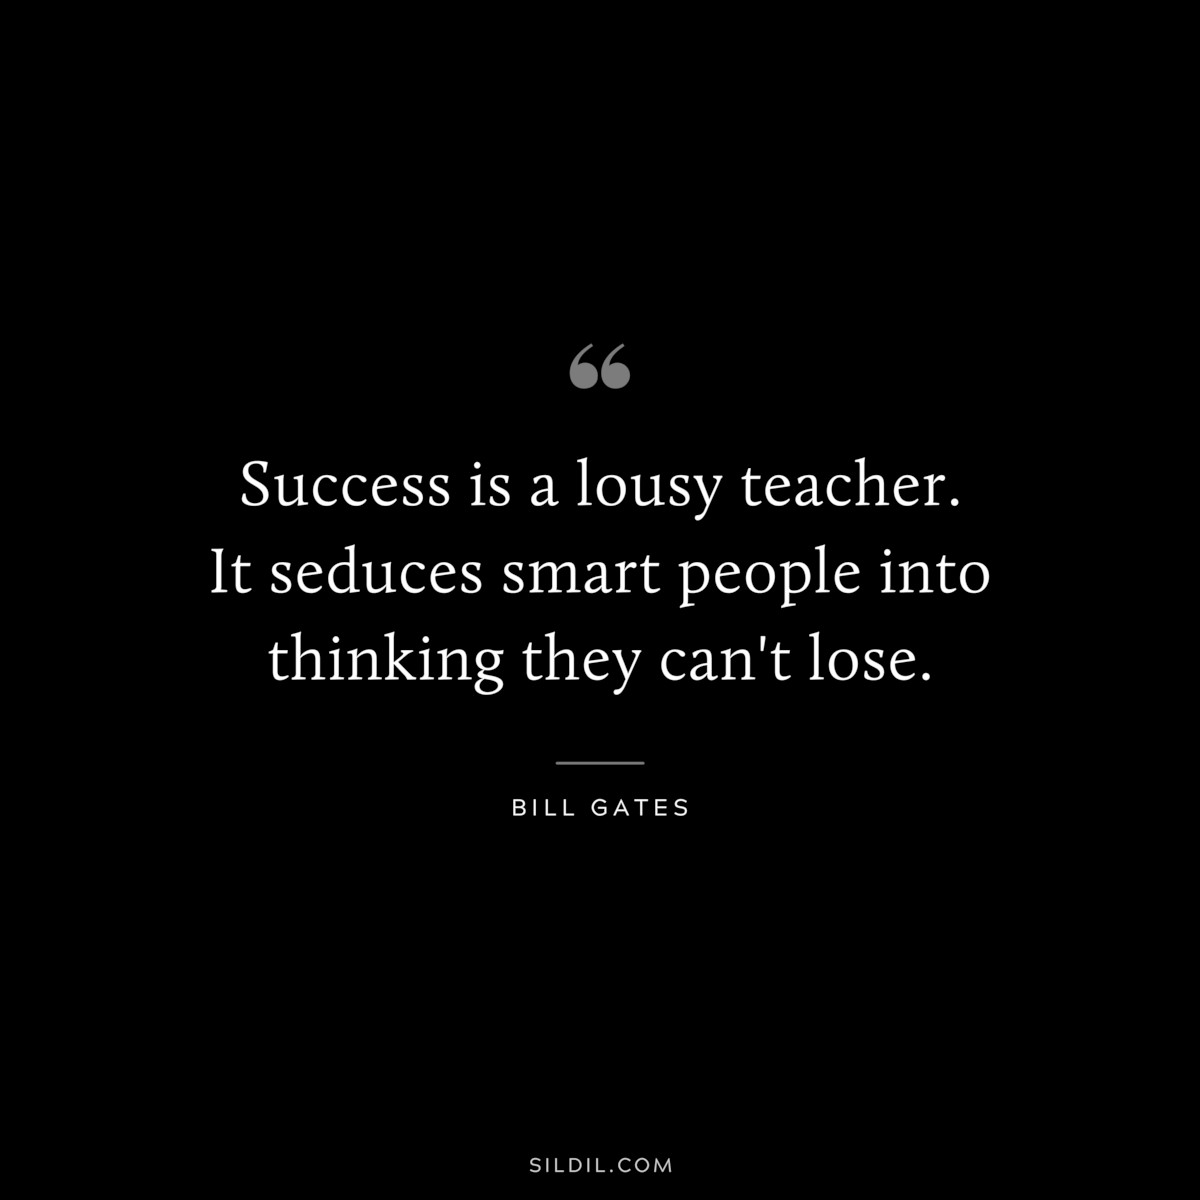 Success is a lousy teacher. It seduces smart people into thinking they can't lose. ― Bill Gates